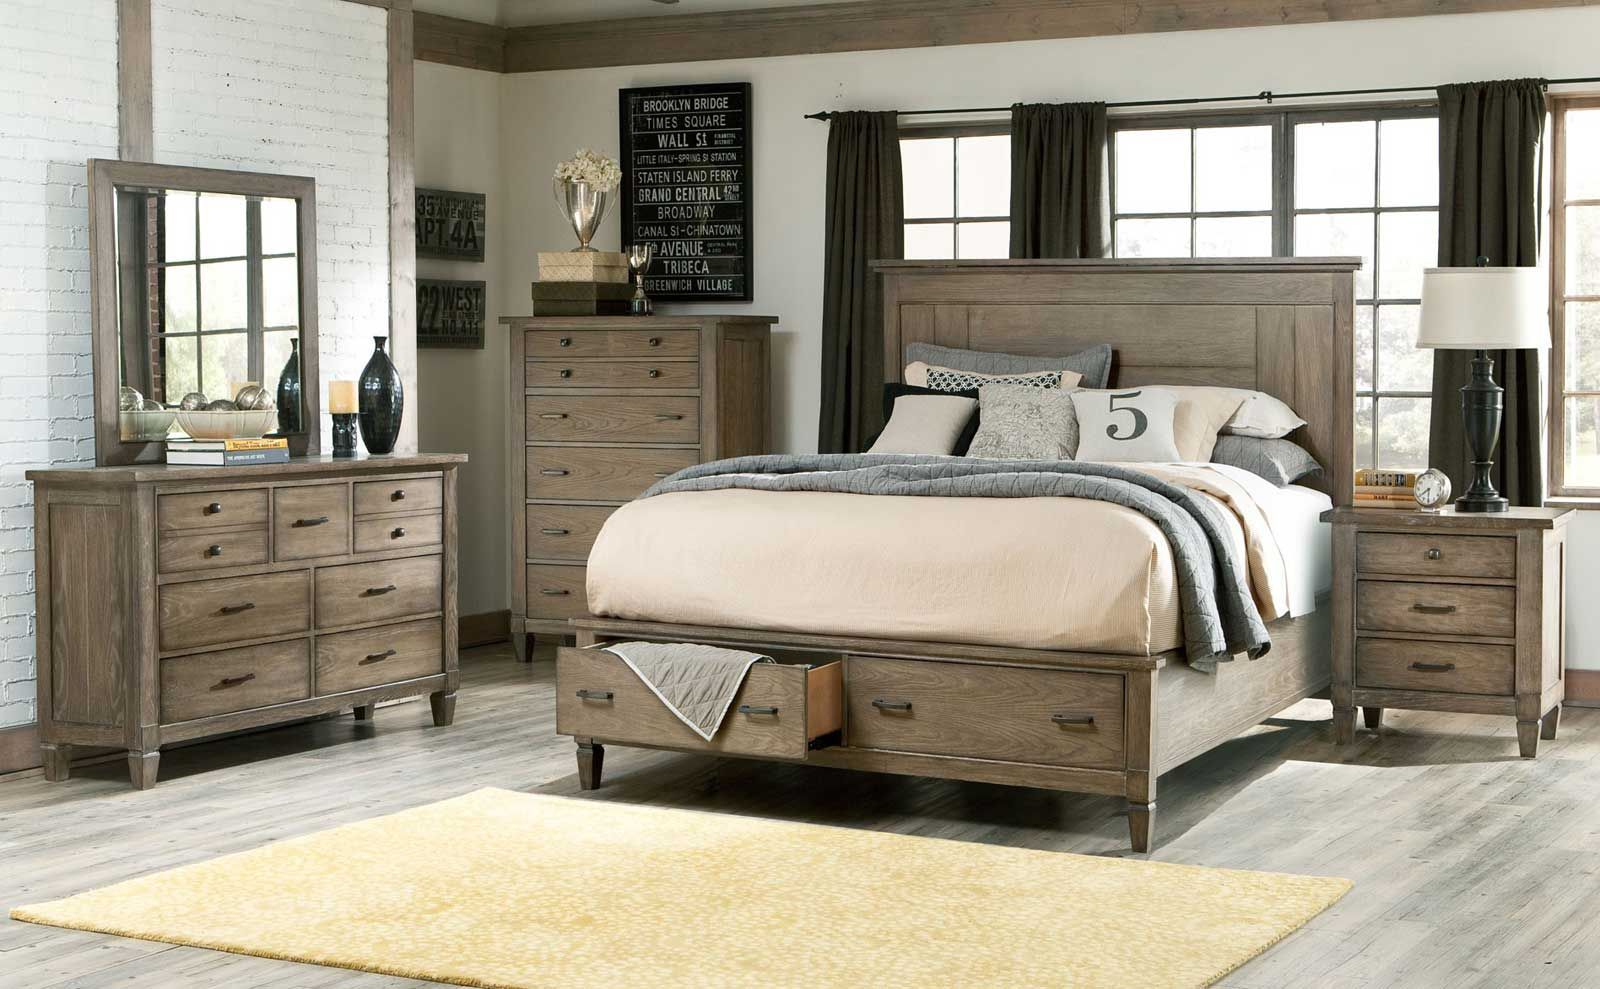 Image Result For Wood King Size Bedroom Sets Home Design Rustic in dimensions 1600 X 989